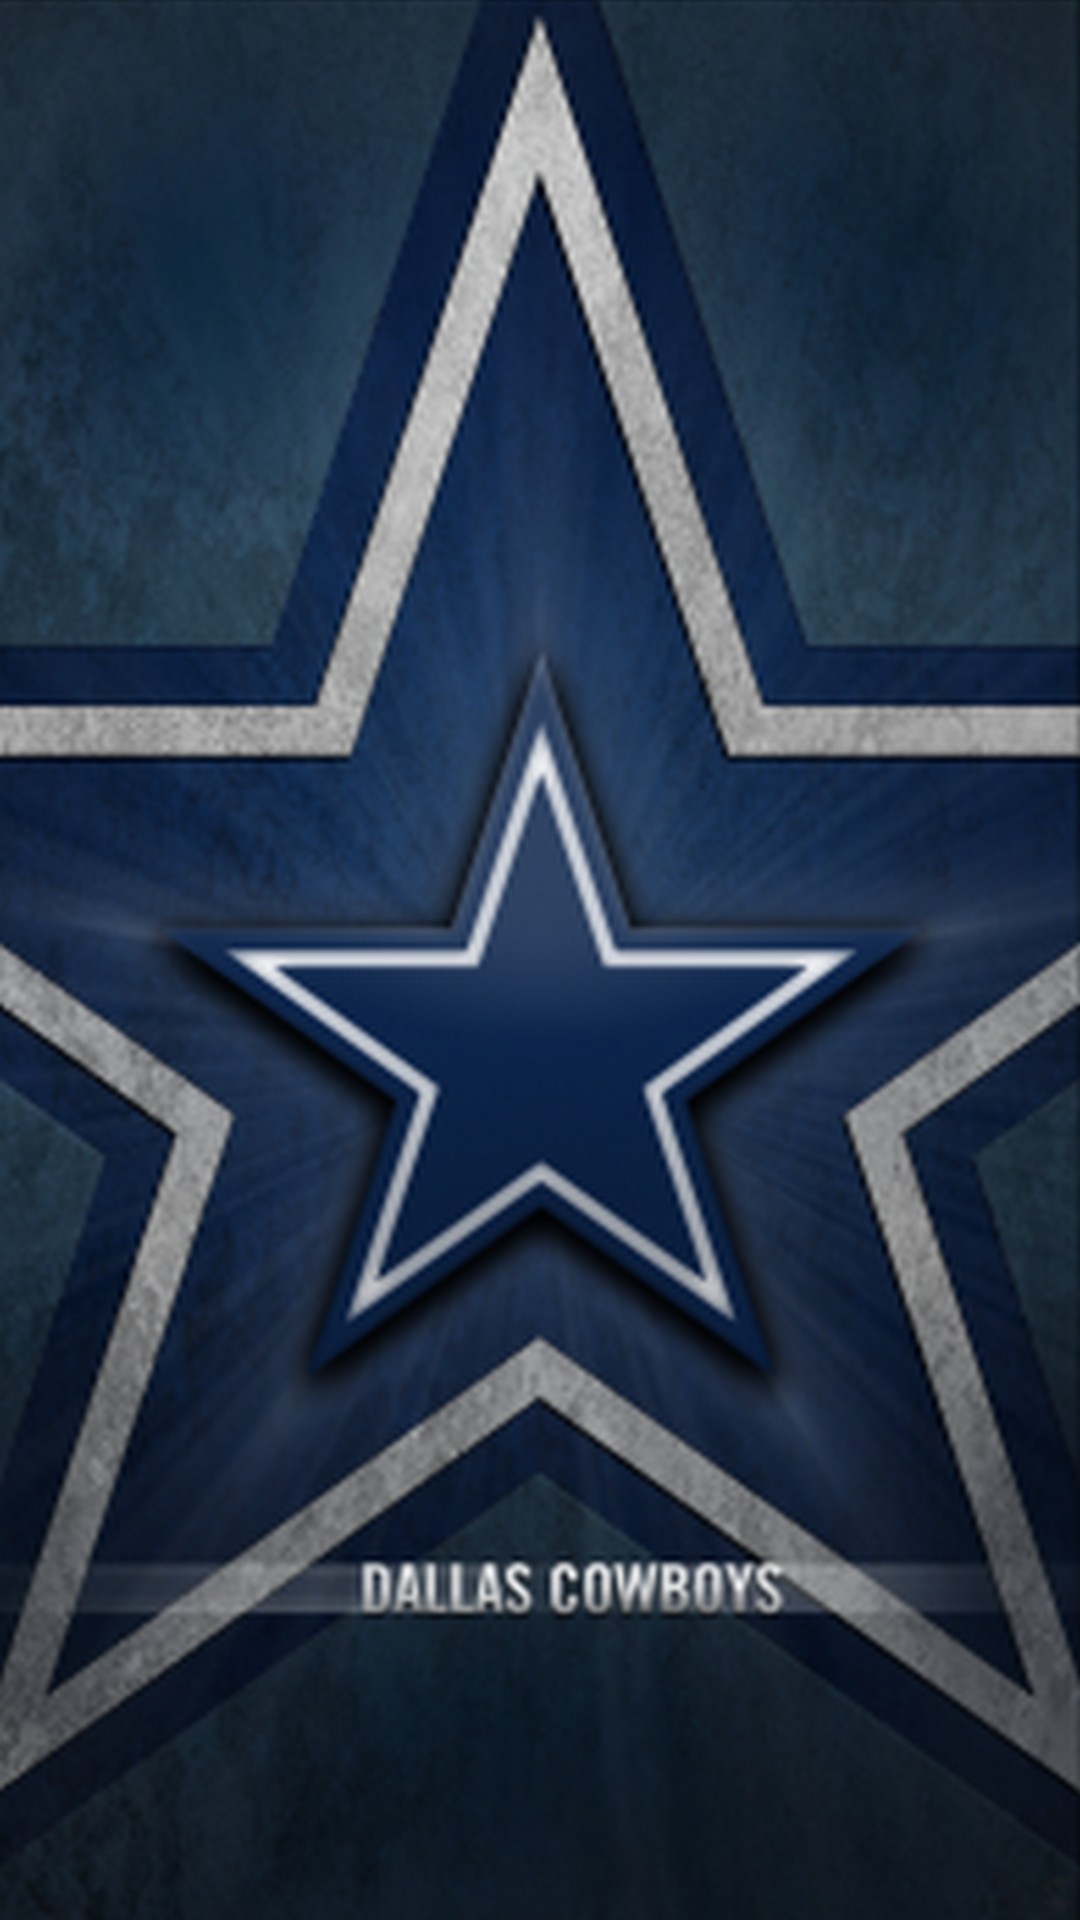 Dallas Cowboys iPhone XS Wallpaper with high-resolution 1080x1920 pixel. Download and set as wallpaper for Apple iPhone X, XS Max, XR, 8, 7, 6, SE, iPad, Android